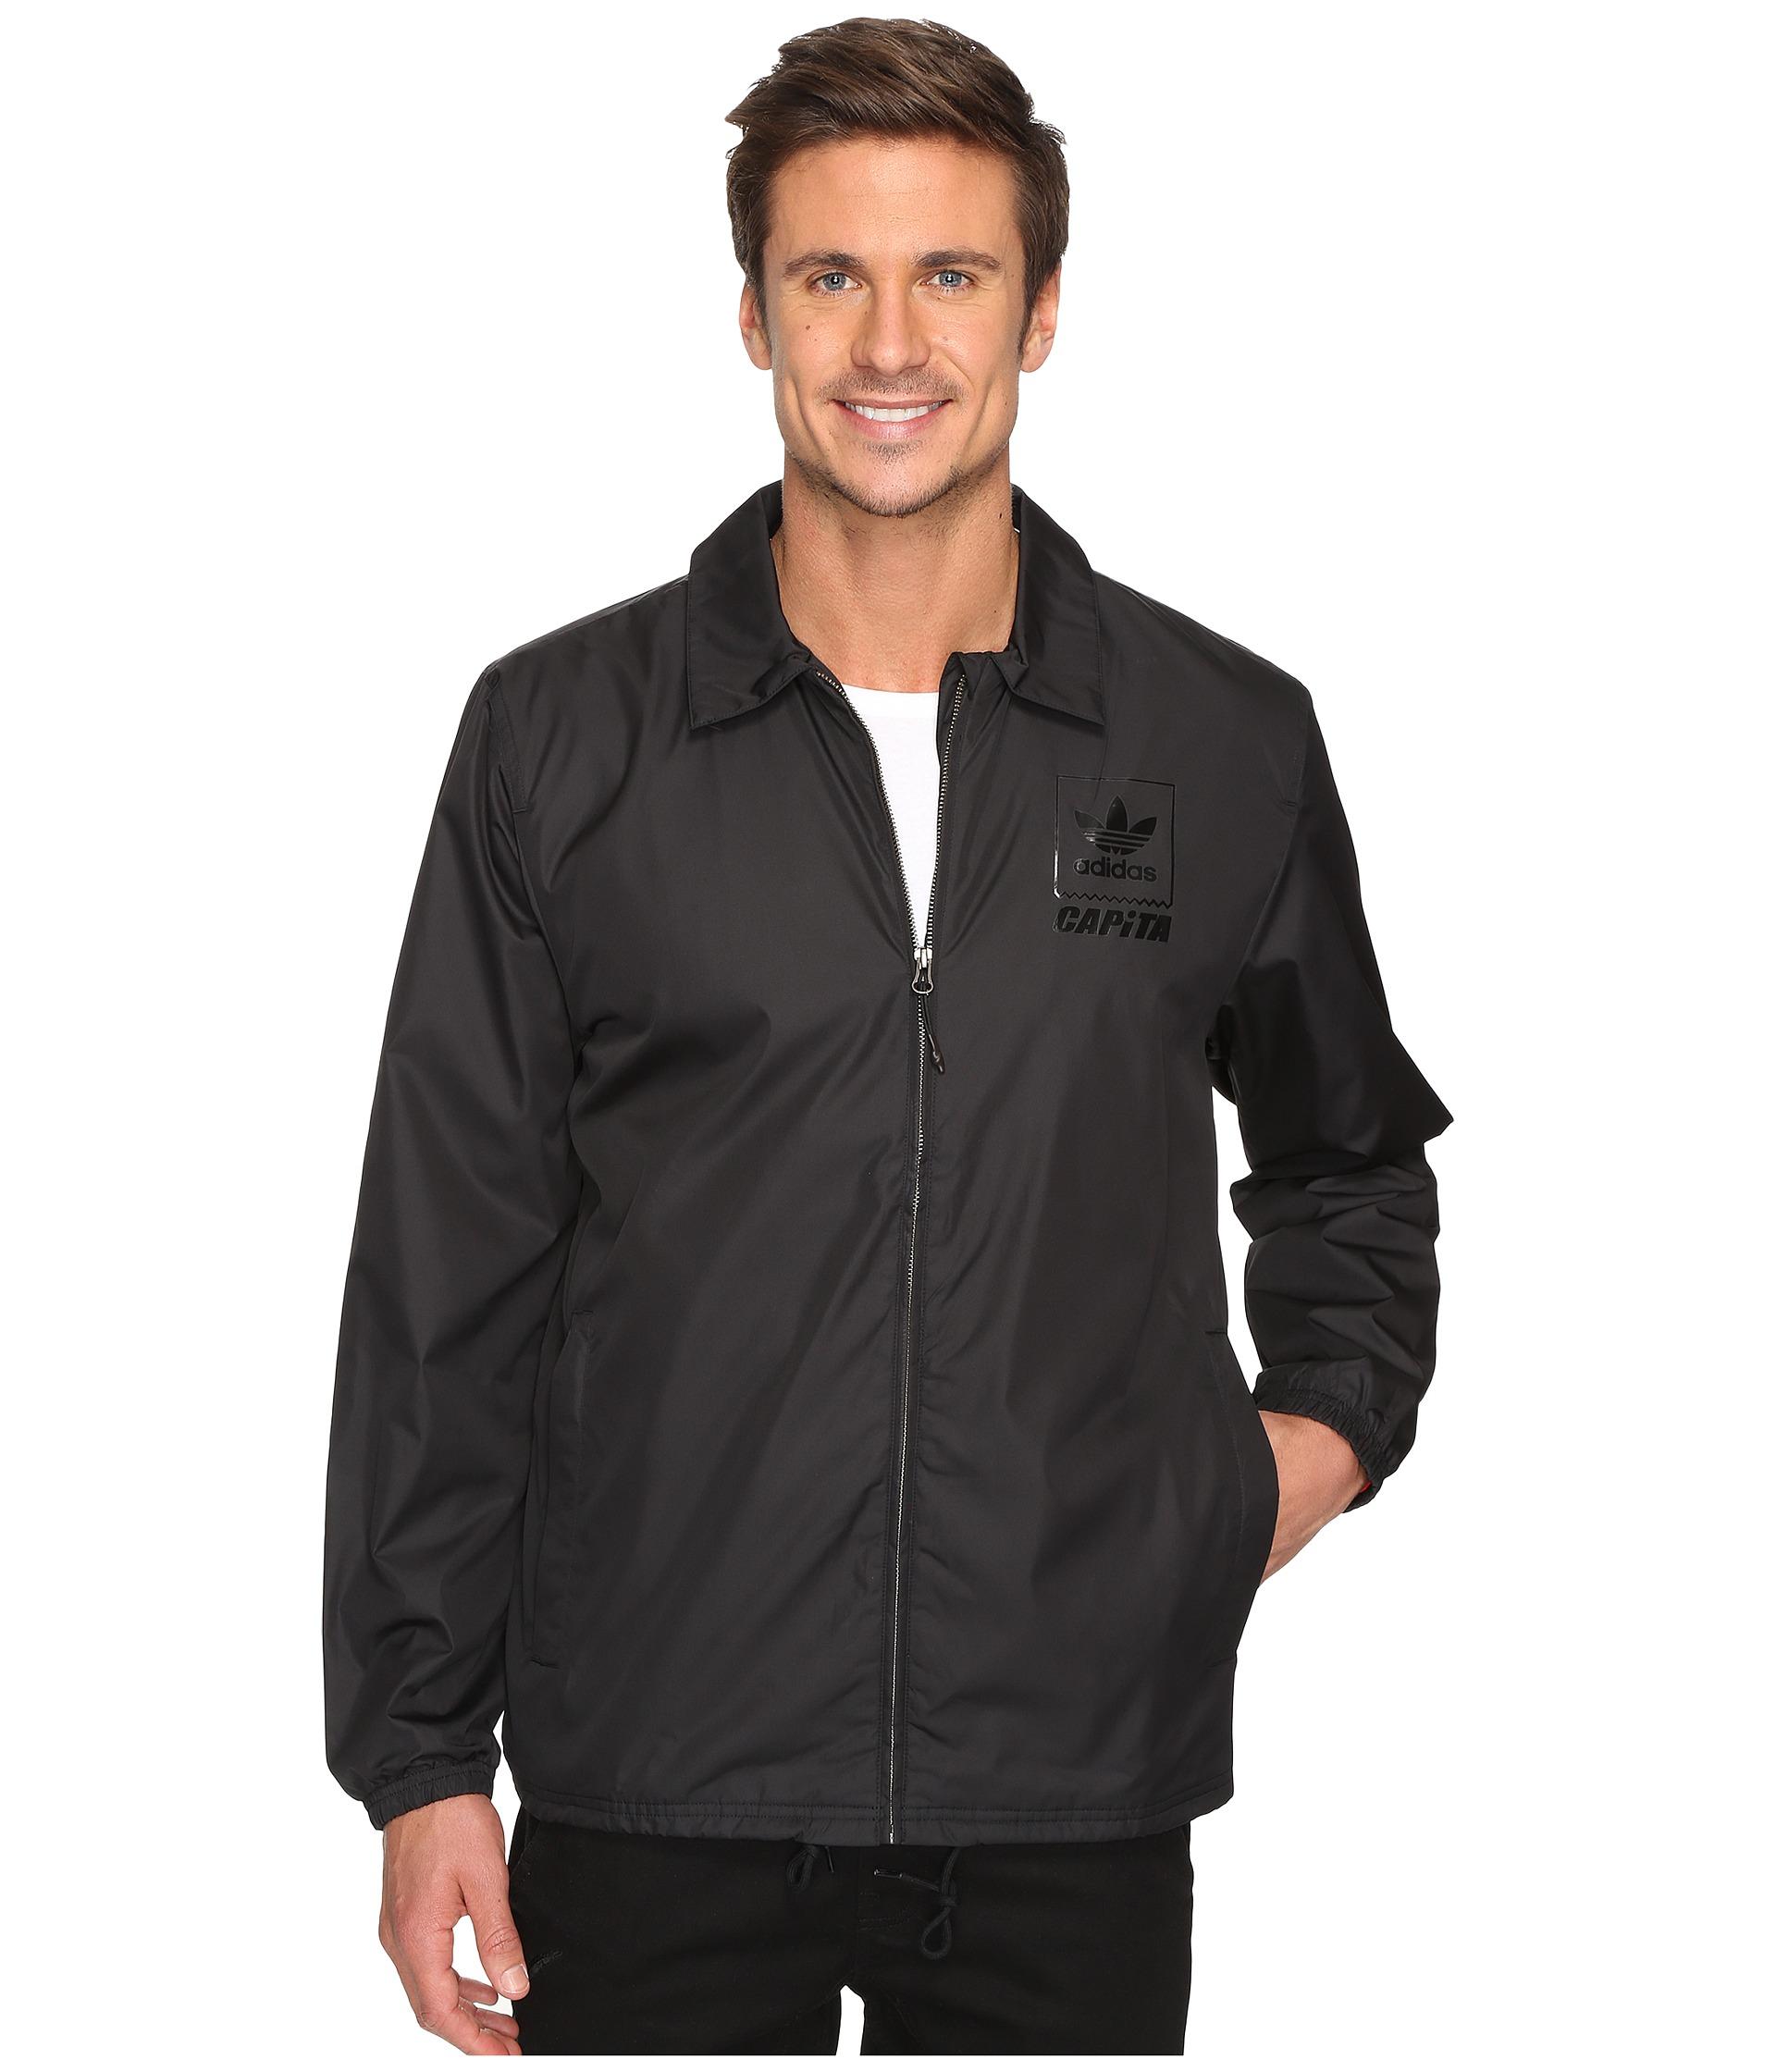 adidas Originals Synthetic Capita Coaches Jacket in Black for Men - Lyst